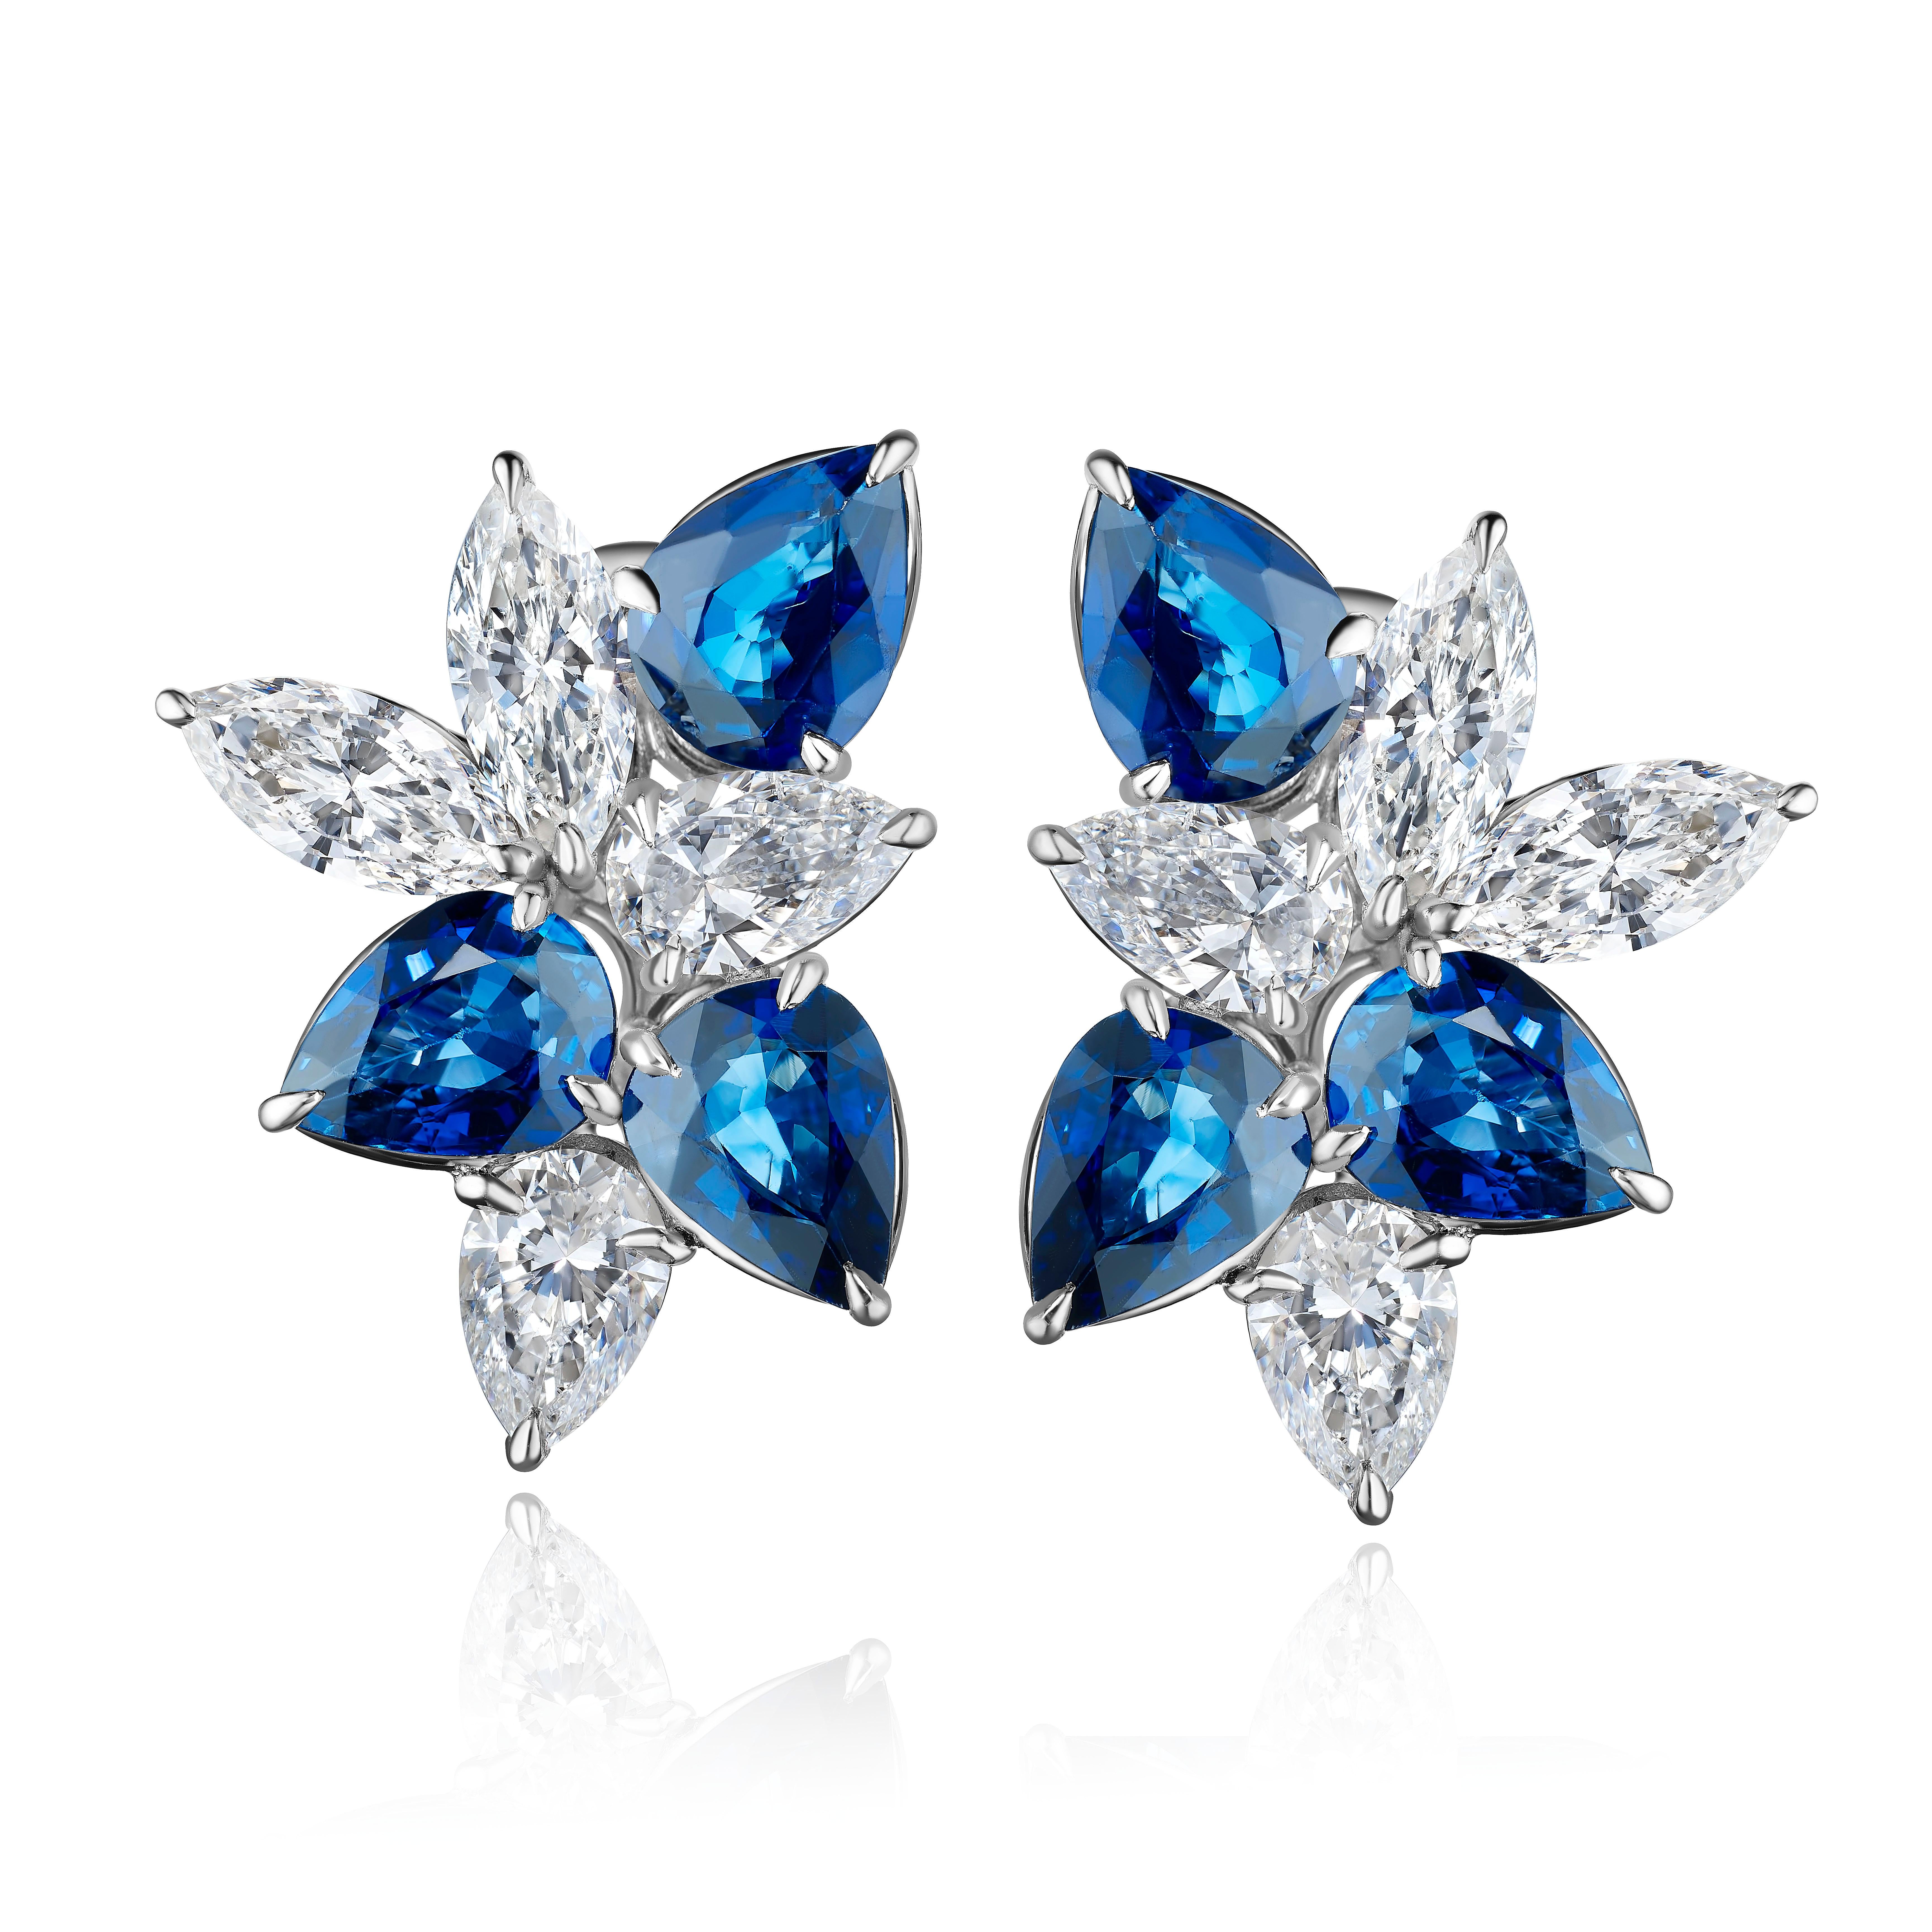 The Classic Cluster Earring. Redefined. Set with Sapphires and Diamonds and Set in Platinum and 18 Karat White Gold.

Sapphires totaling 5.34 Carats.
Diamonds Totaling 4.18 Carats.
9.52 Carats Total